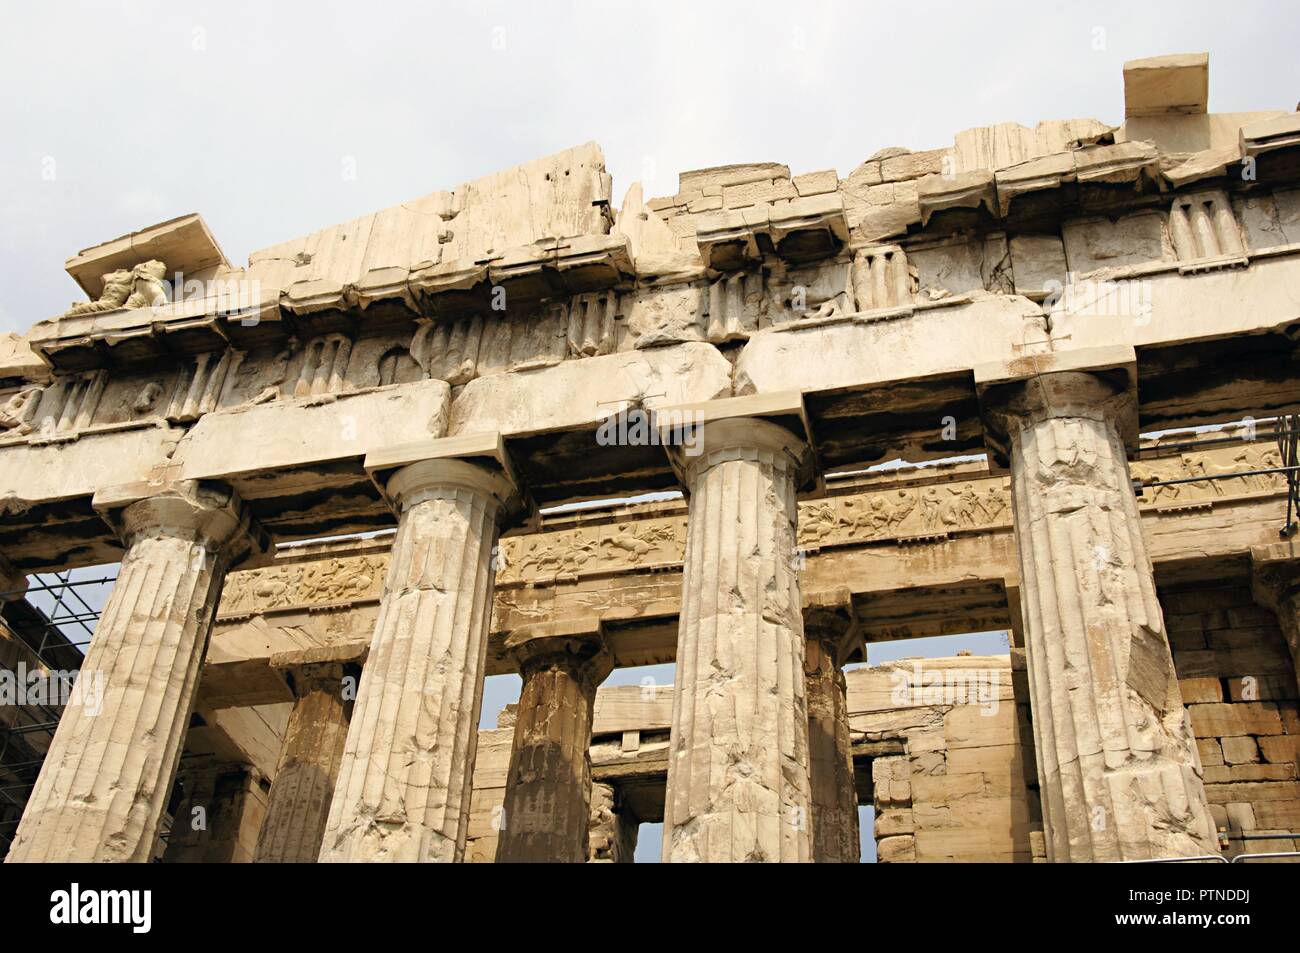 Greece. Athens. Acropolis. Parthenon. Classical temple dedicated to Athena. 447 BC-432 BC. Doric order. Architects: Iktinos and Callicrates. Sculptor Phidias. Pediment, establature with frieze, triglyph, metope, architrave, capital and columns. Architectural detail. Stock Photo